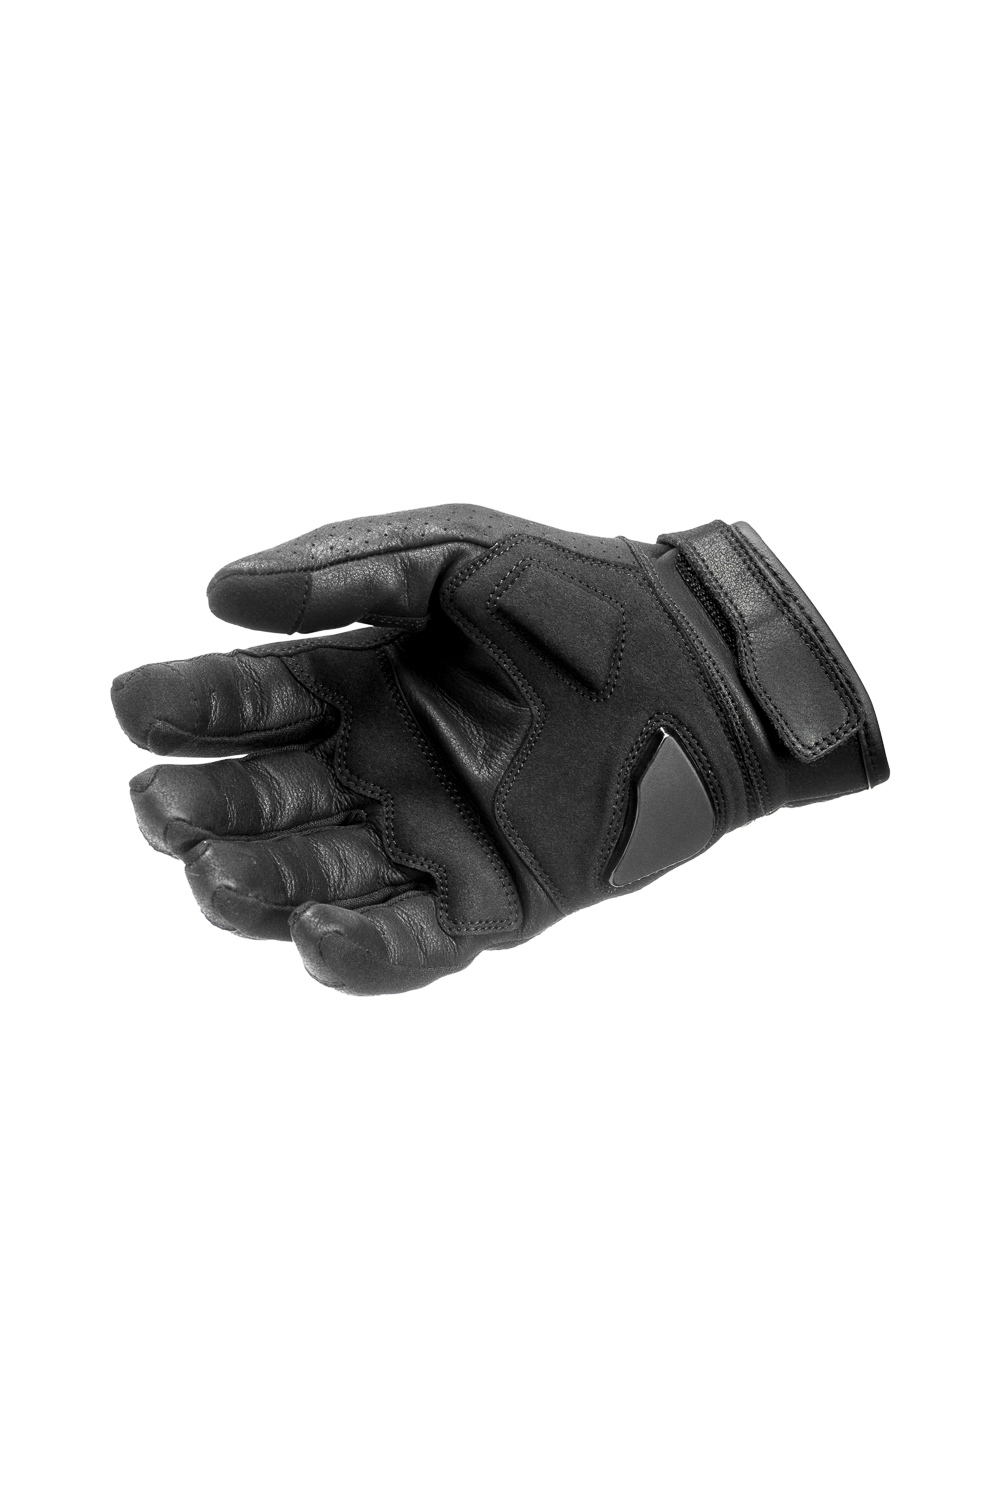 ONYX BLACK - Leather Motorcycle Gloves 4